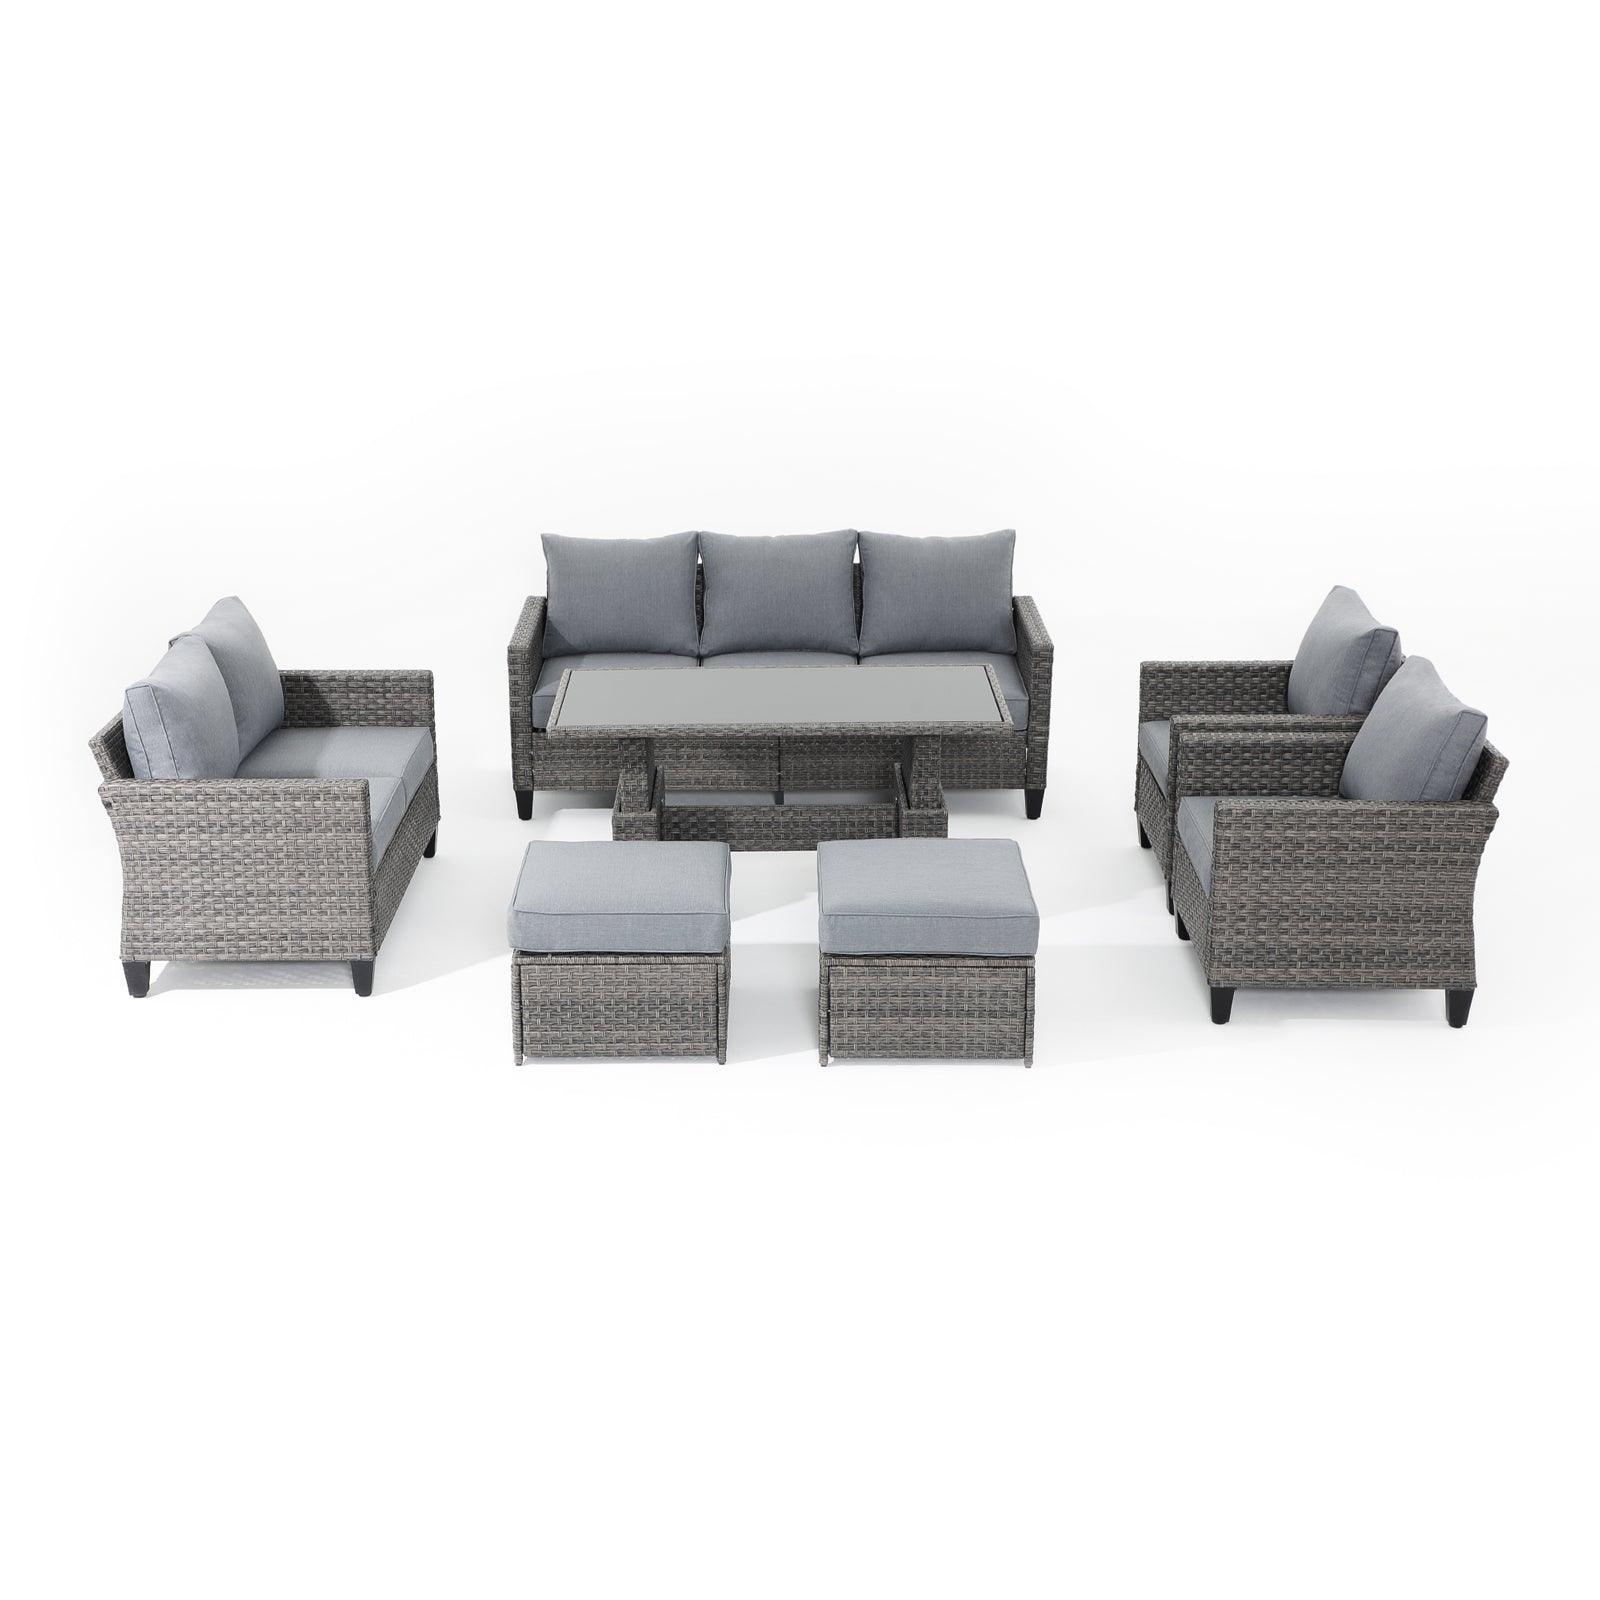 Ayia Modern HDPE Wicker Outdoor Furniture, 7-Piece Grey outdoor conversation set with Rattan design, grey cushions, a 3-seater sofa, 2 armchairs, 2 ottomans, 1 loveseat, multifunctional outdoor table - Jardina Furniture #color_Grey#piece_7-pc. with ottomans & Table